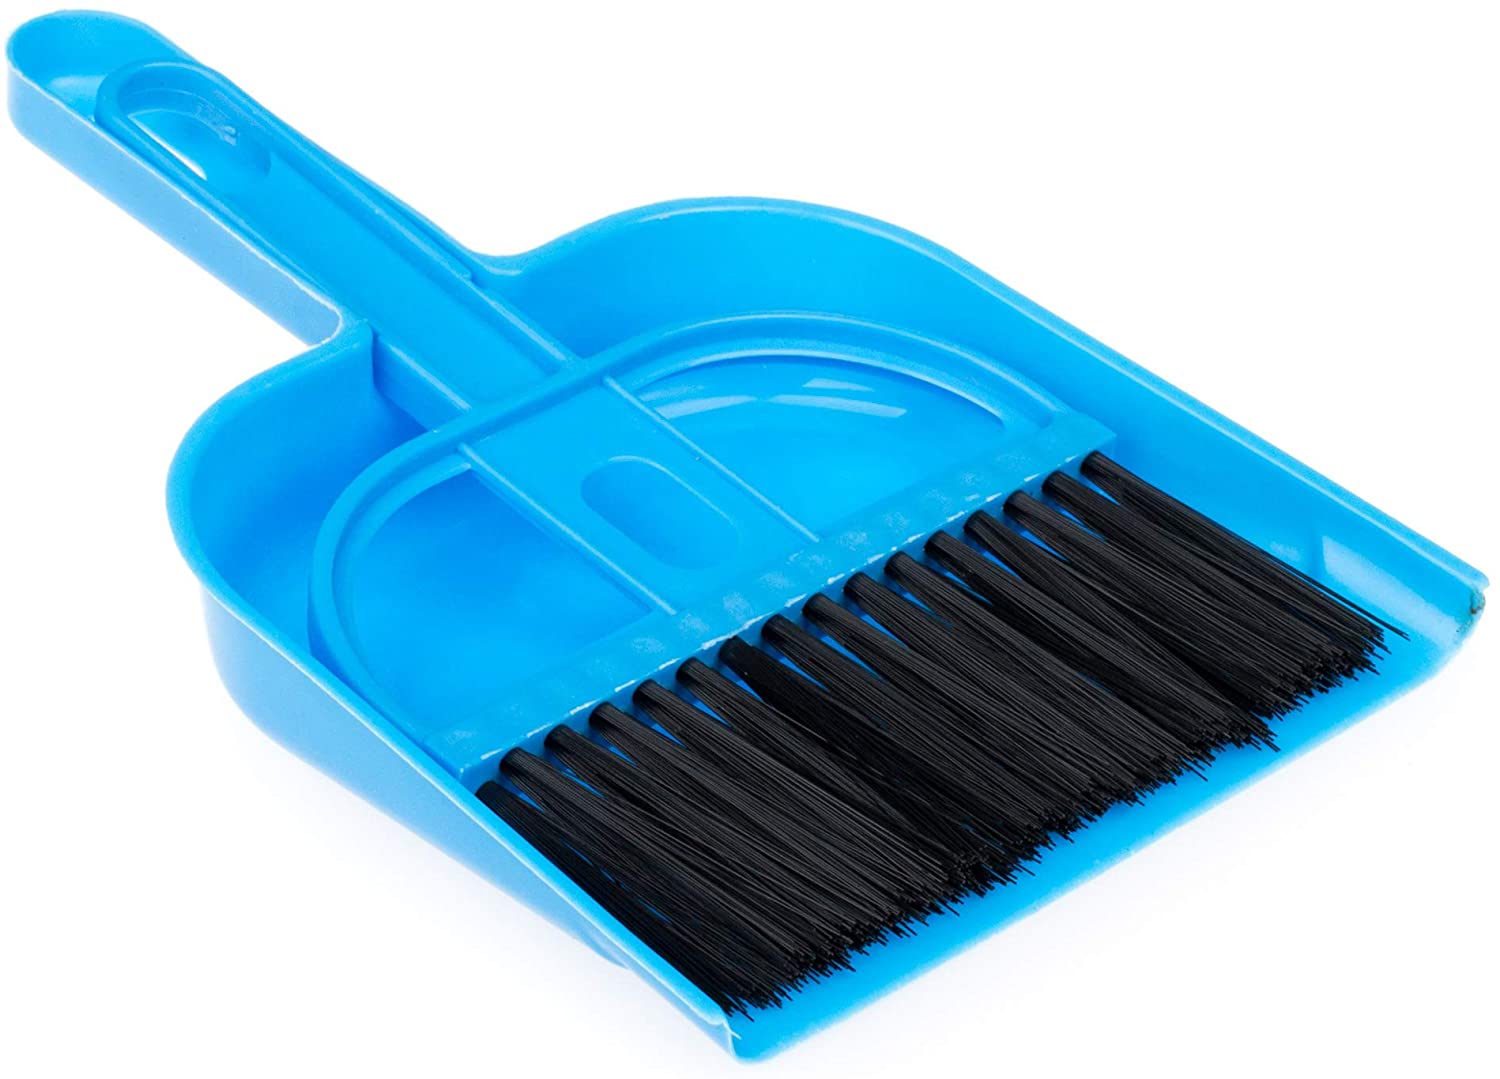 5-best-dust-pan-and-brush